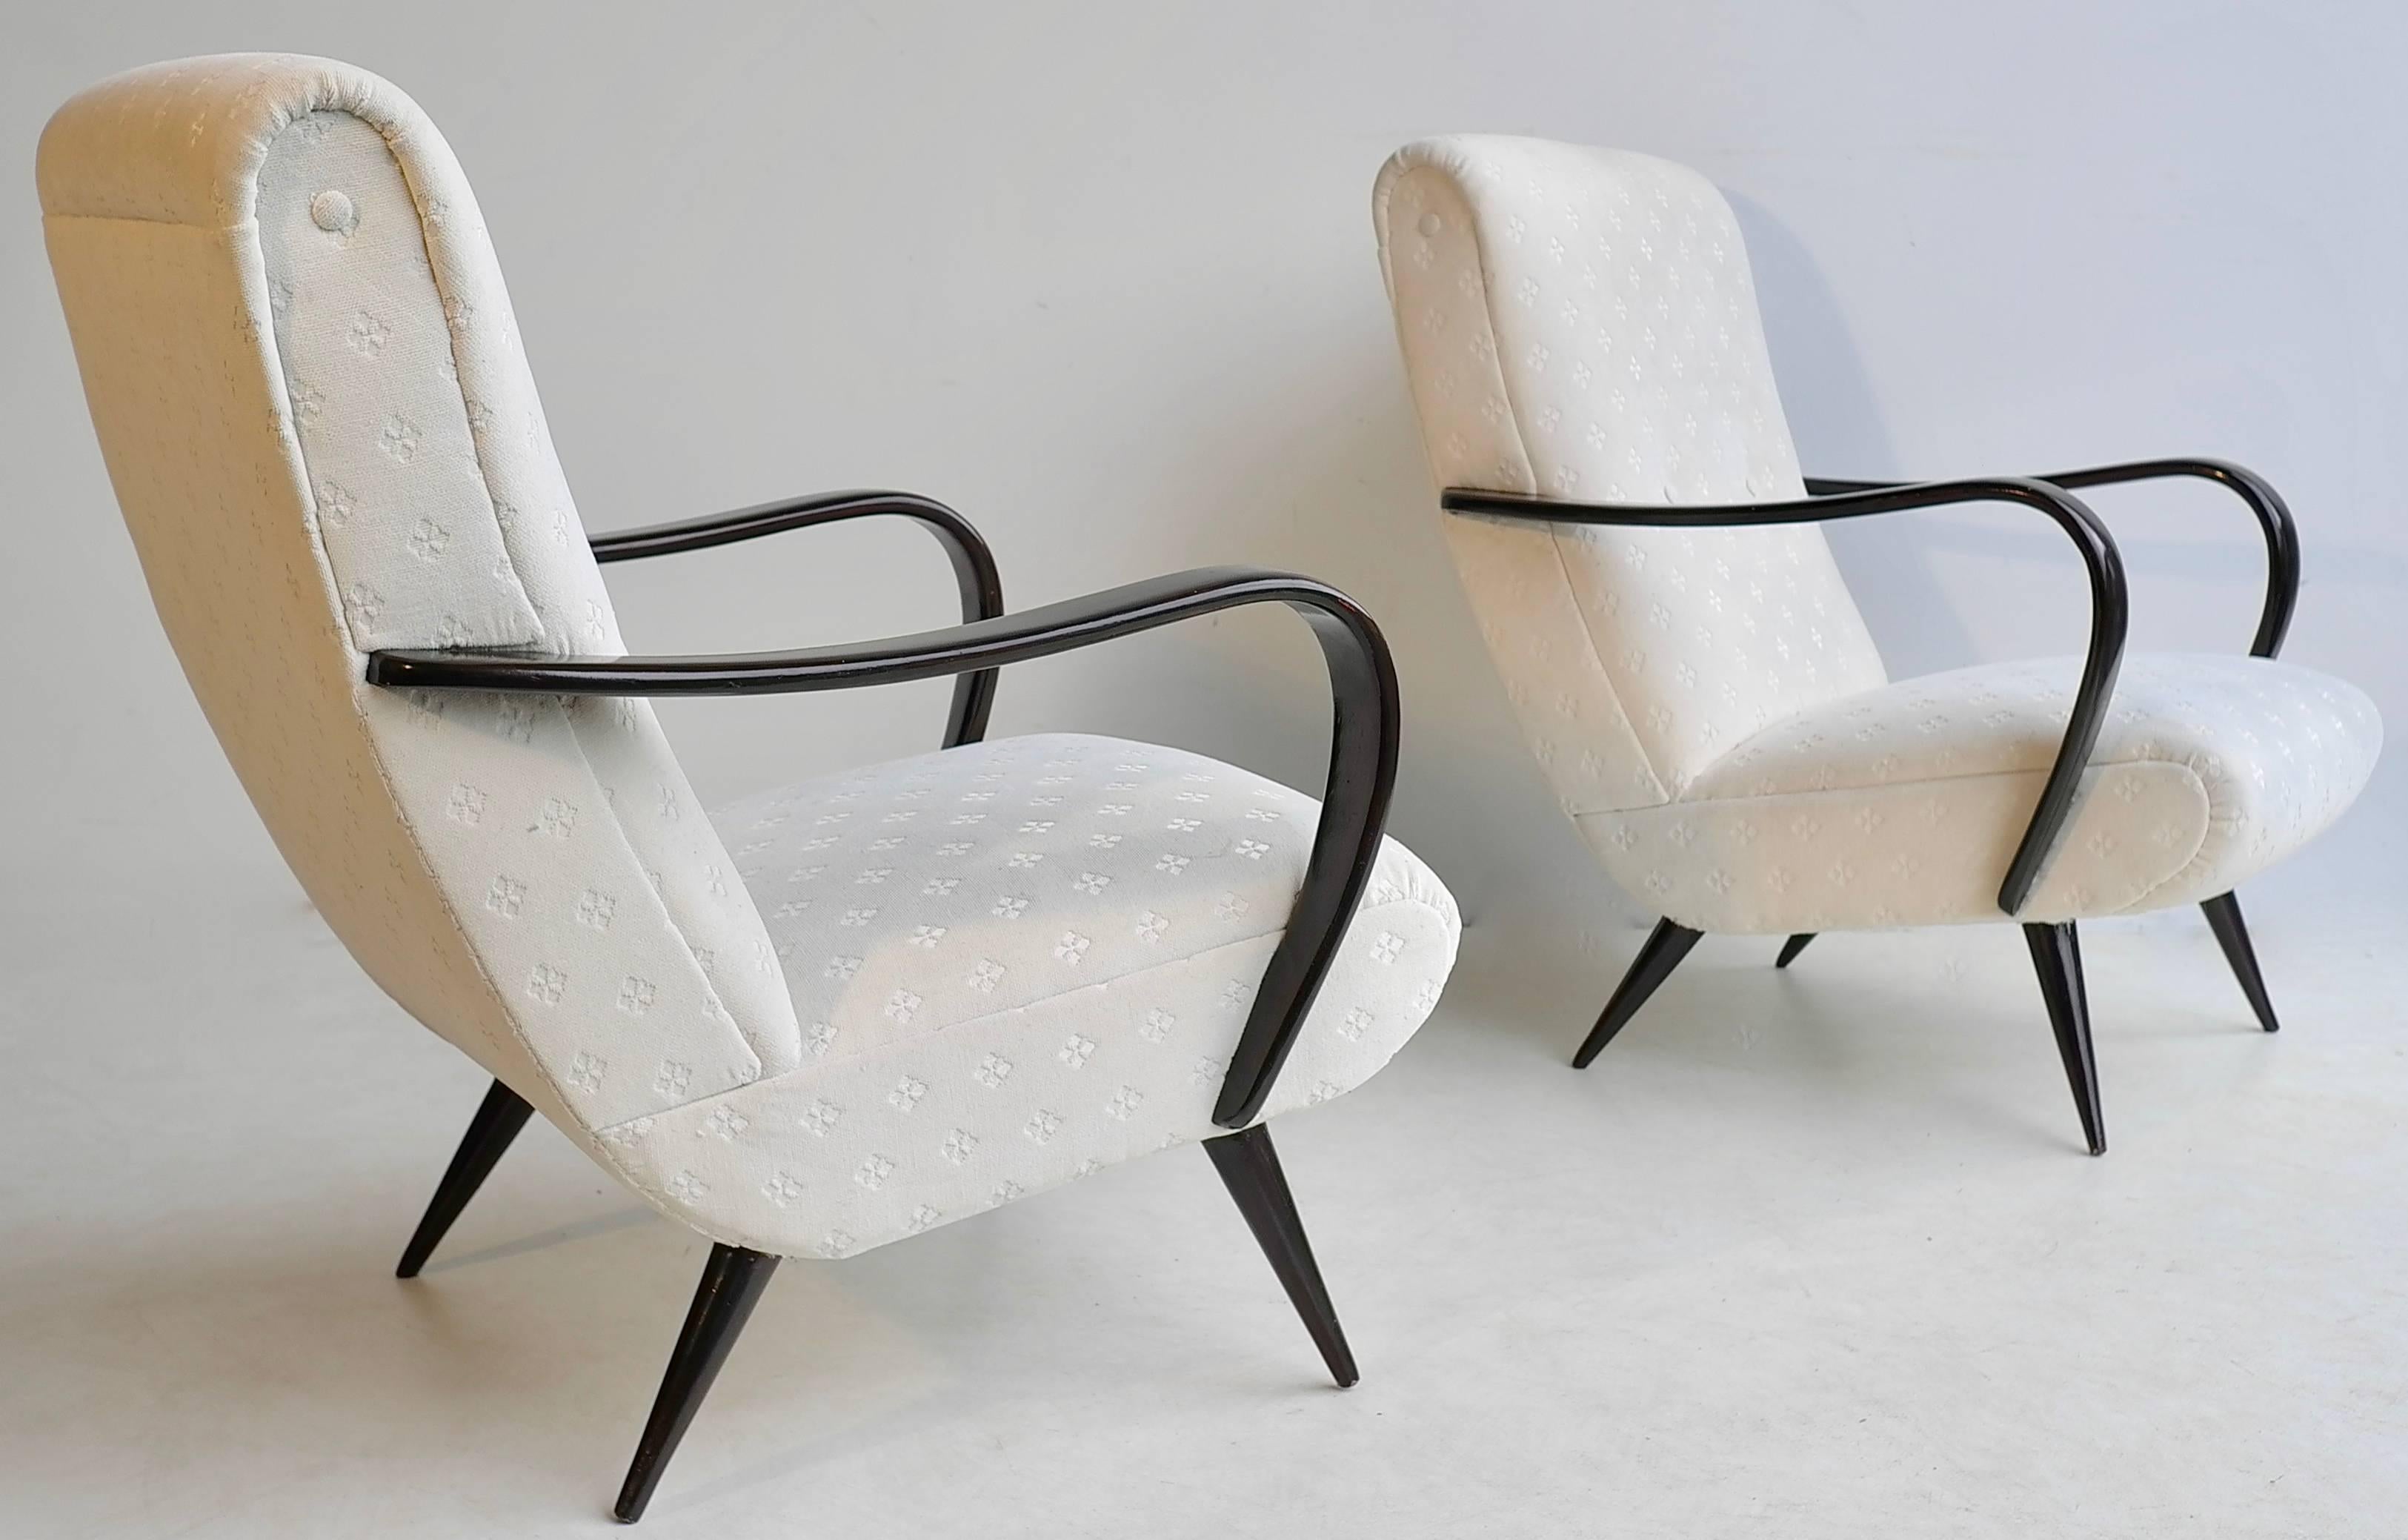 Pair of sculptural lounge chairs with curved dark brown lacquered wooden armrests, Italy, 1950s.